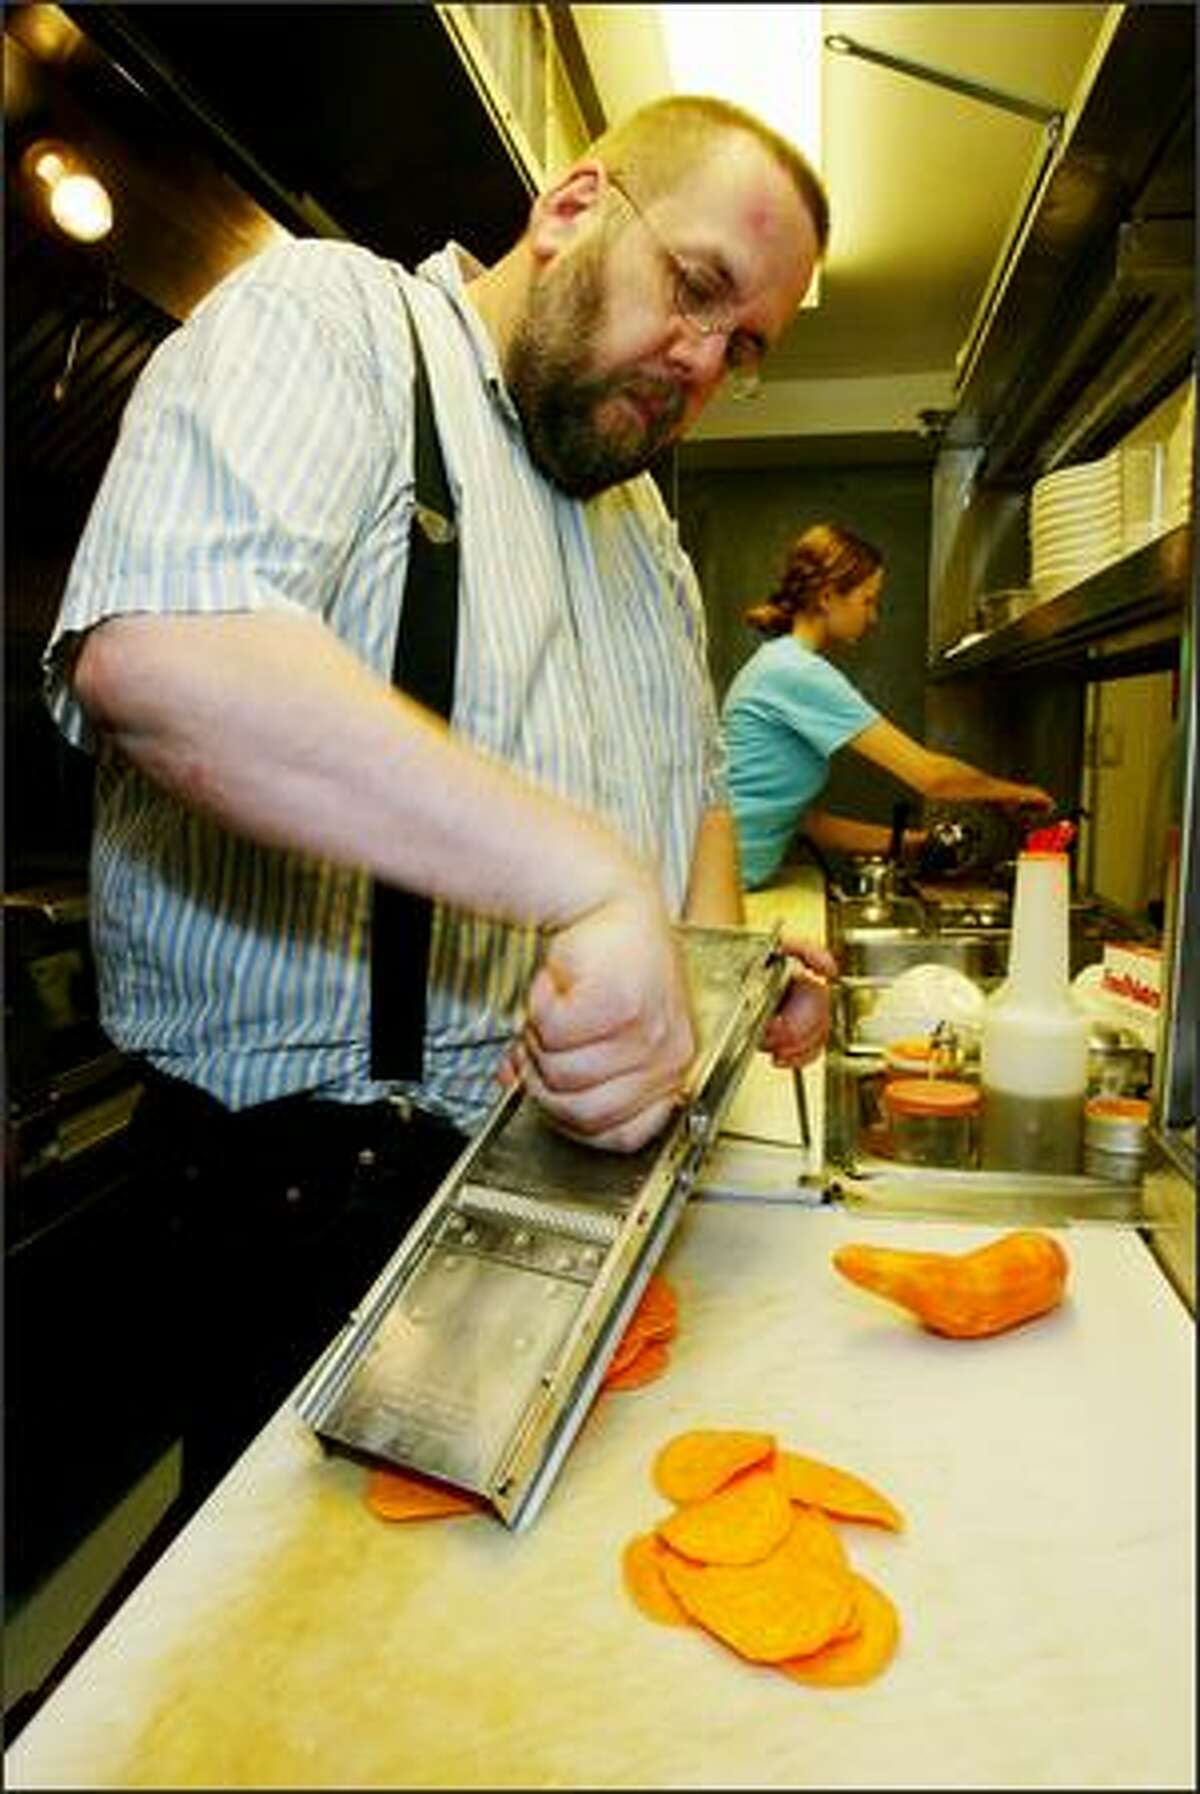 Hot Dish co-owner and chef Daniel McGlothlen slices yam chips as Charlotte Elliott, line cook, works in the background.